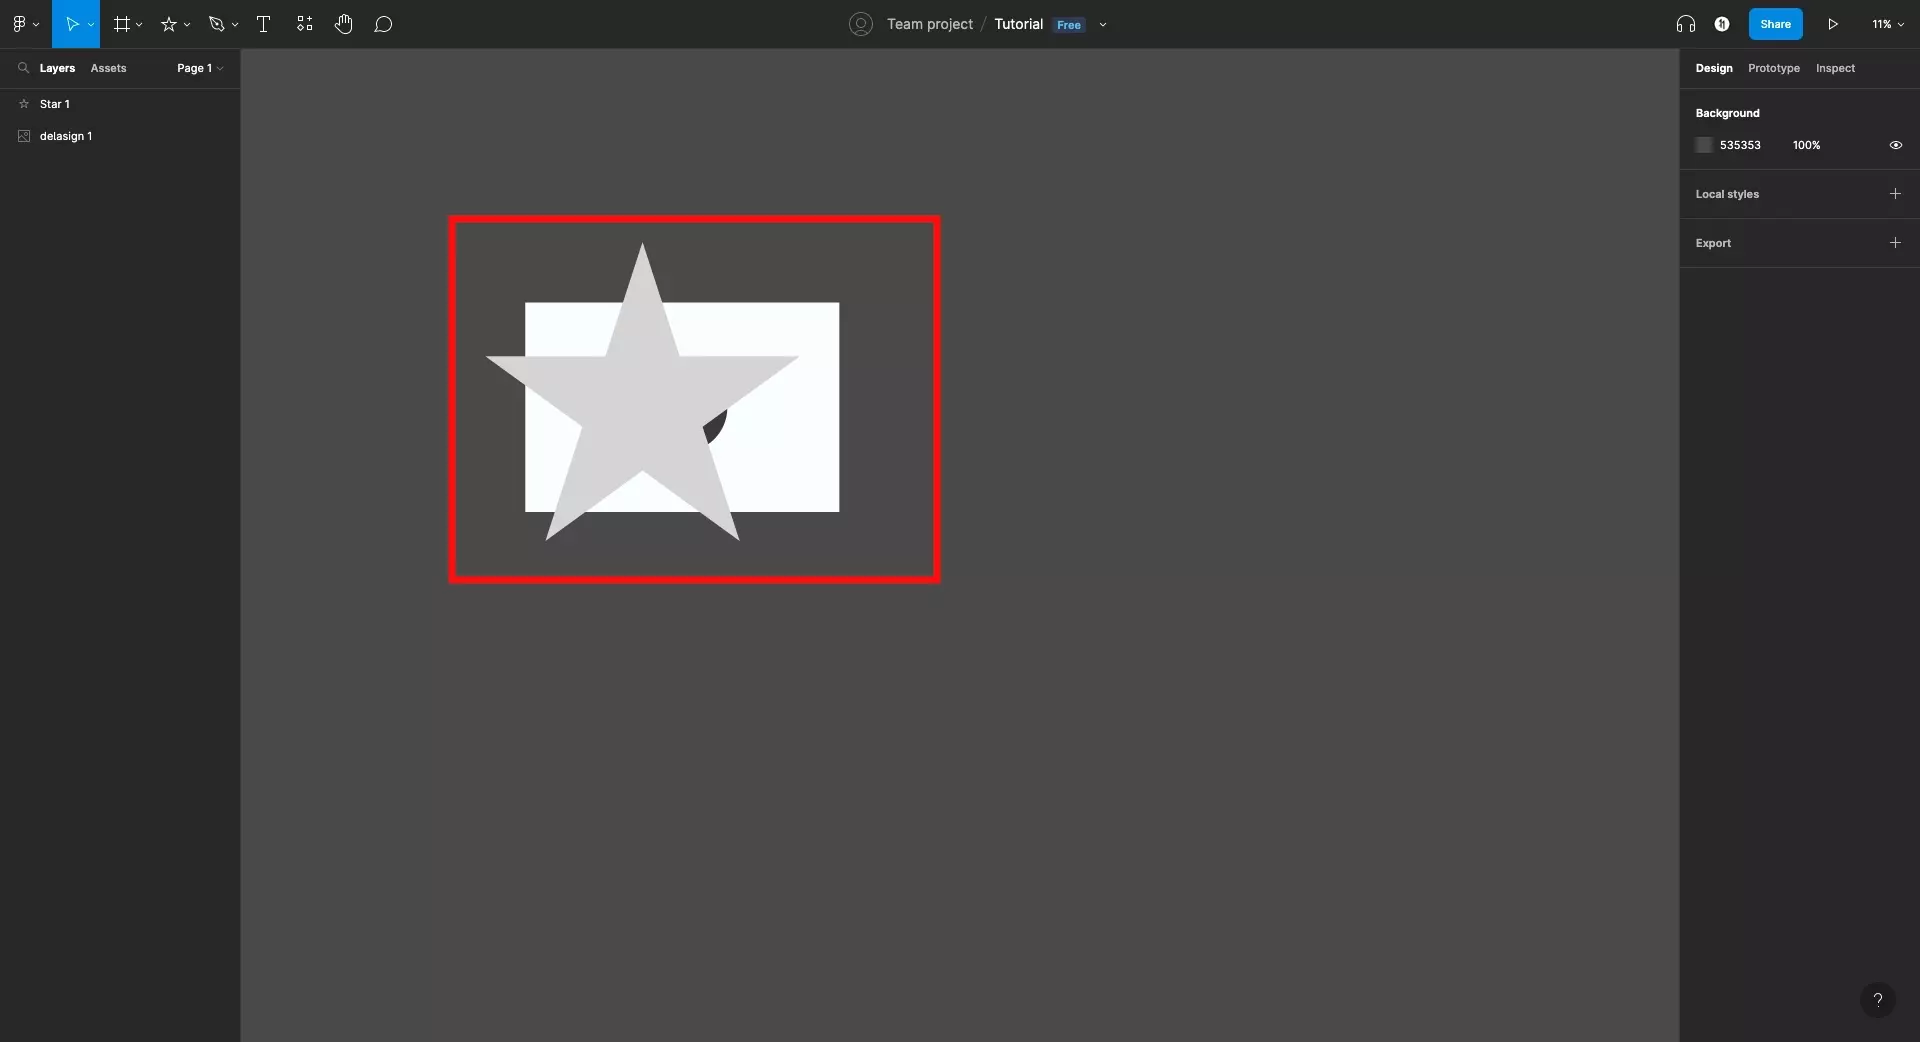 A screenshot of Figma with a highlight over a Star being drawn on top of the delasign logo.